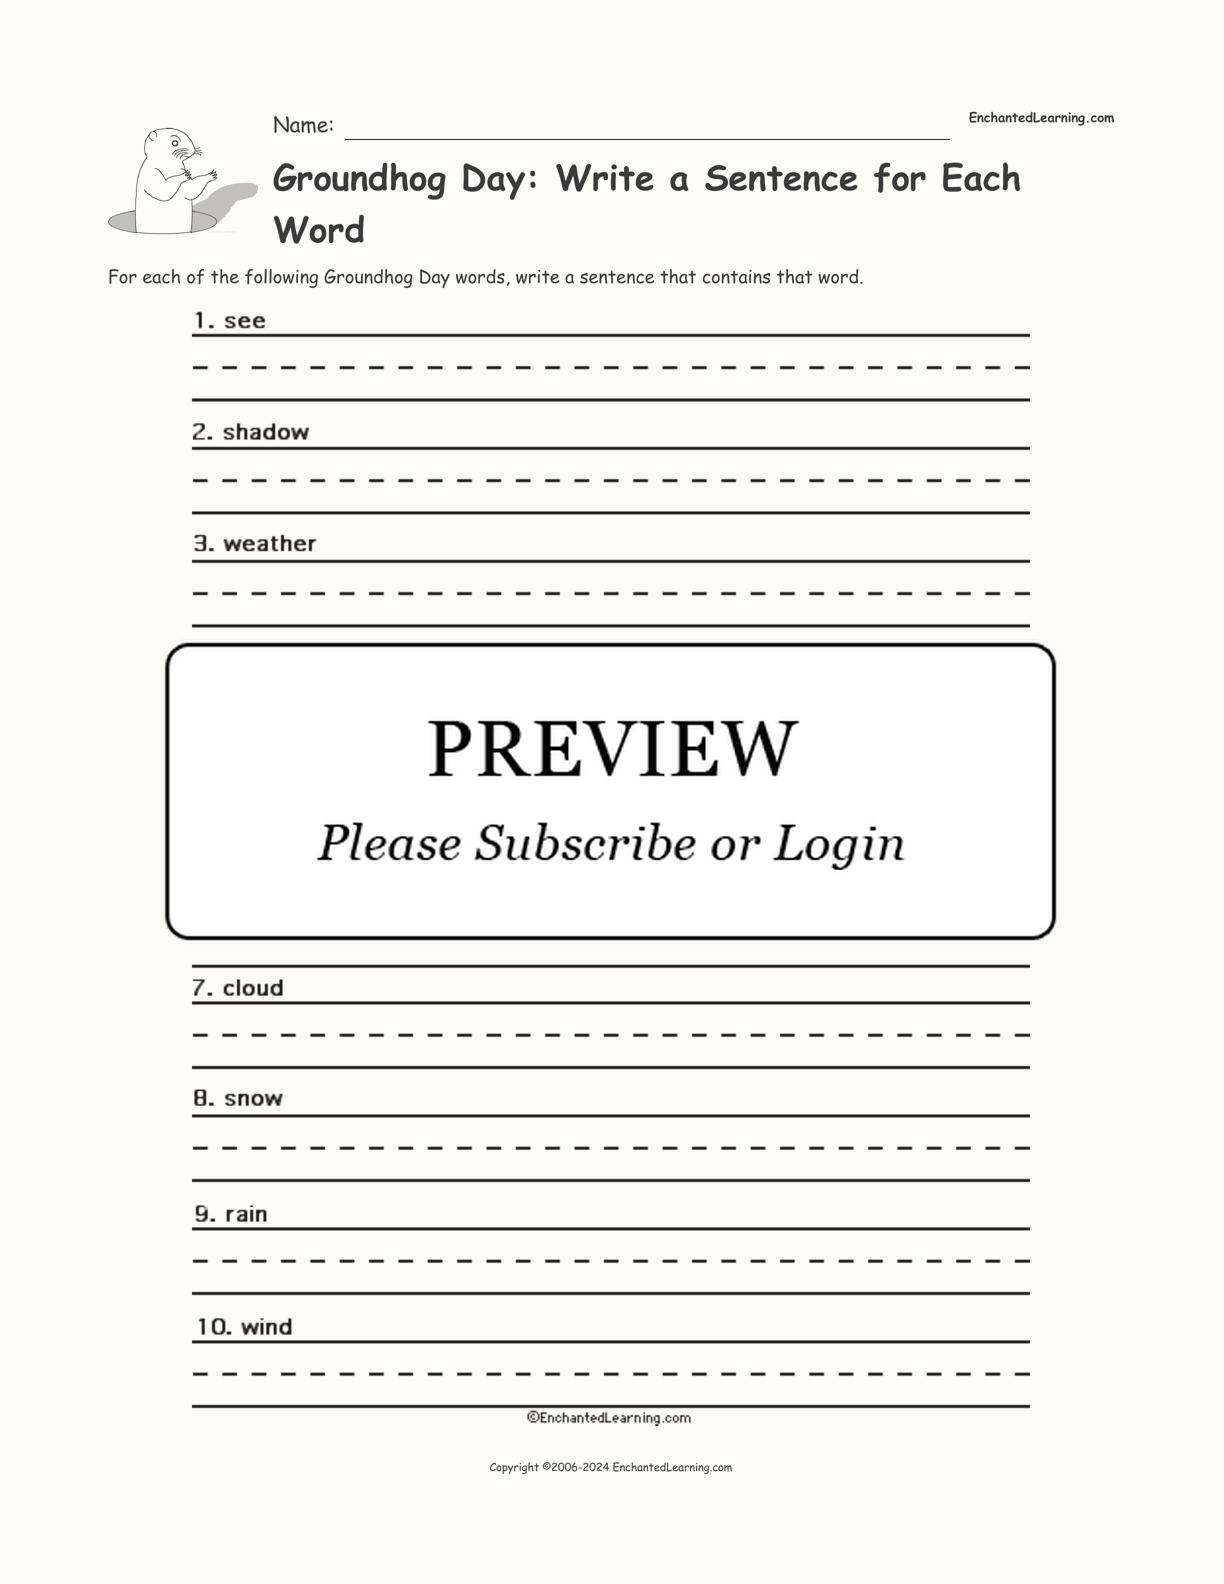 Groundhog Day: Write a Sentence for Each Word interactive printout page 1